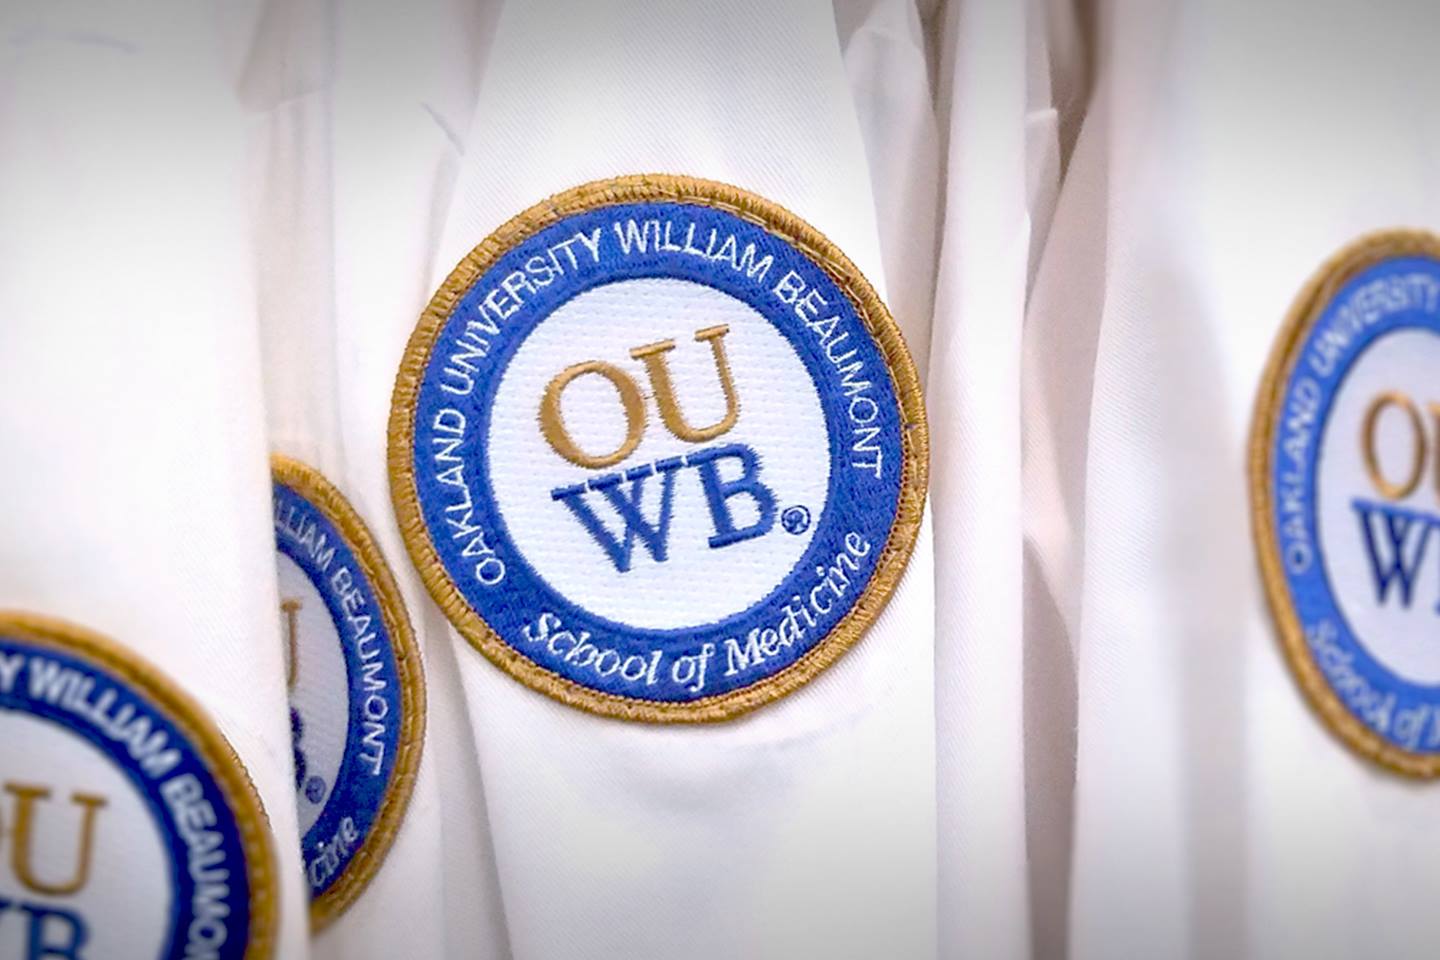 OUWB patch